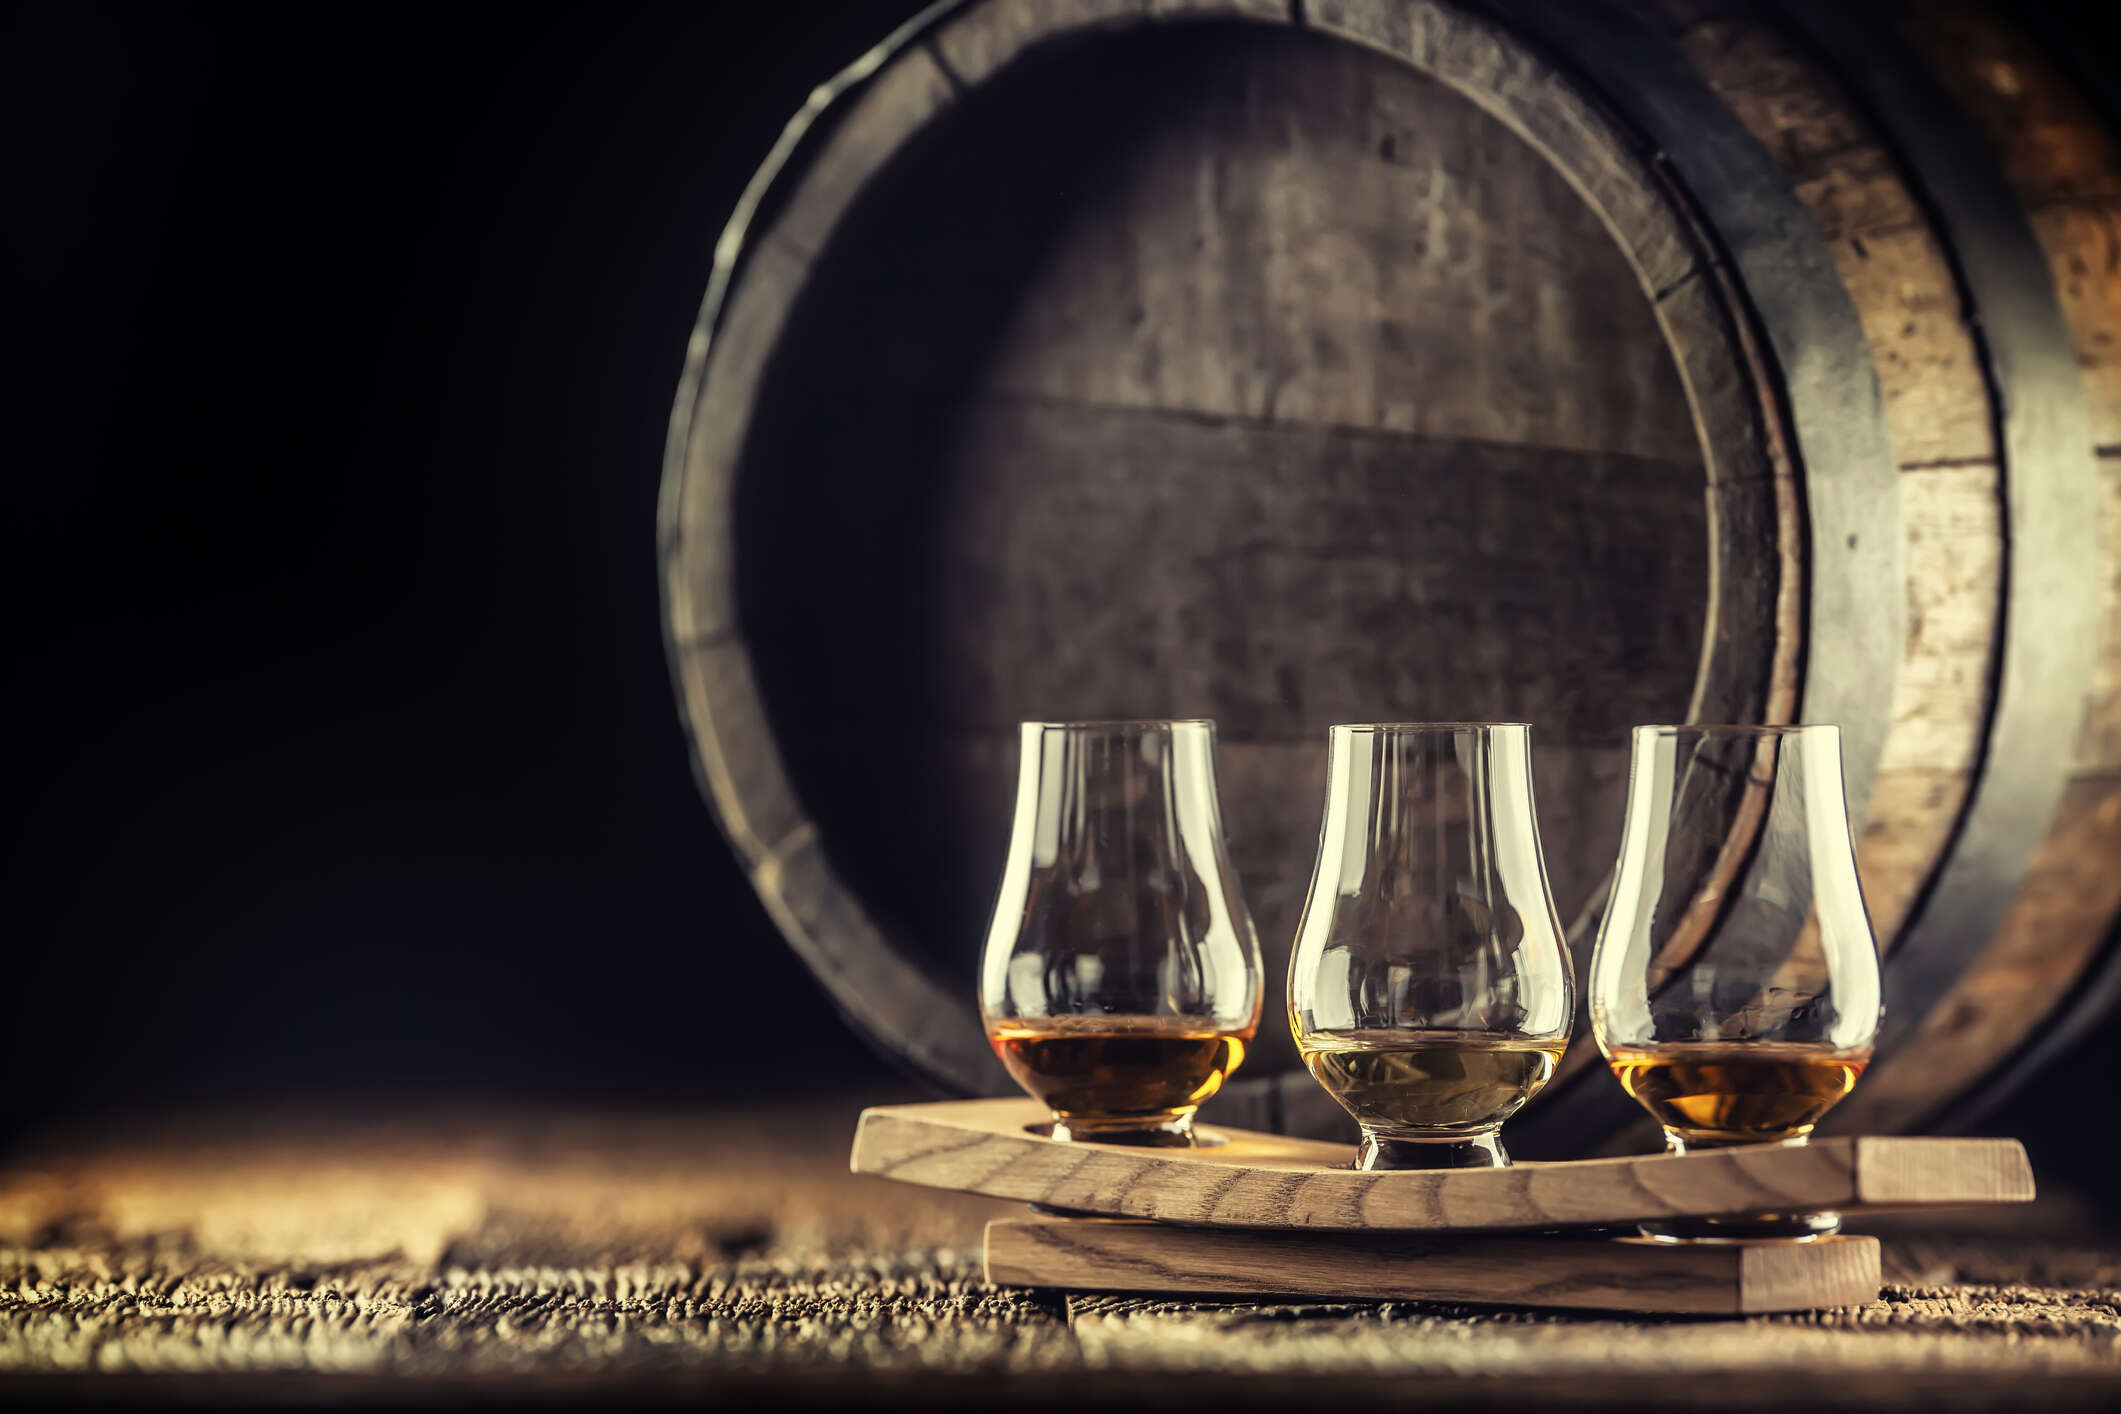 Rare Whisky Investment Continues Growth in 2021